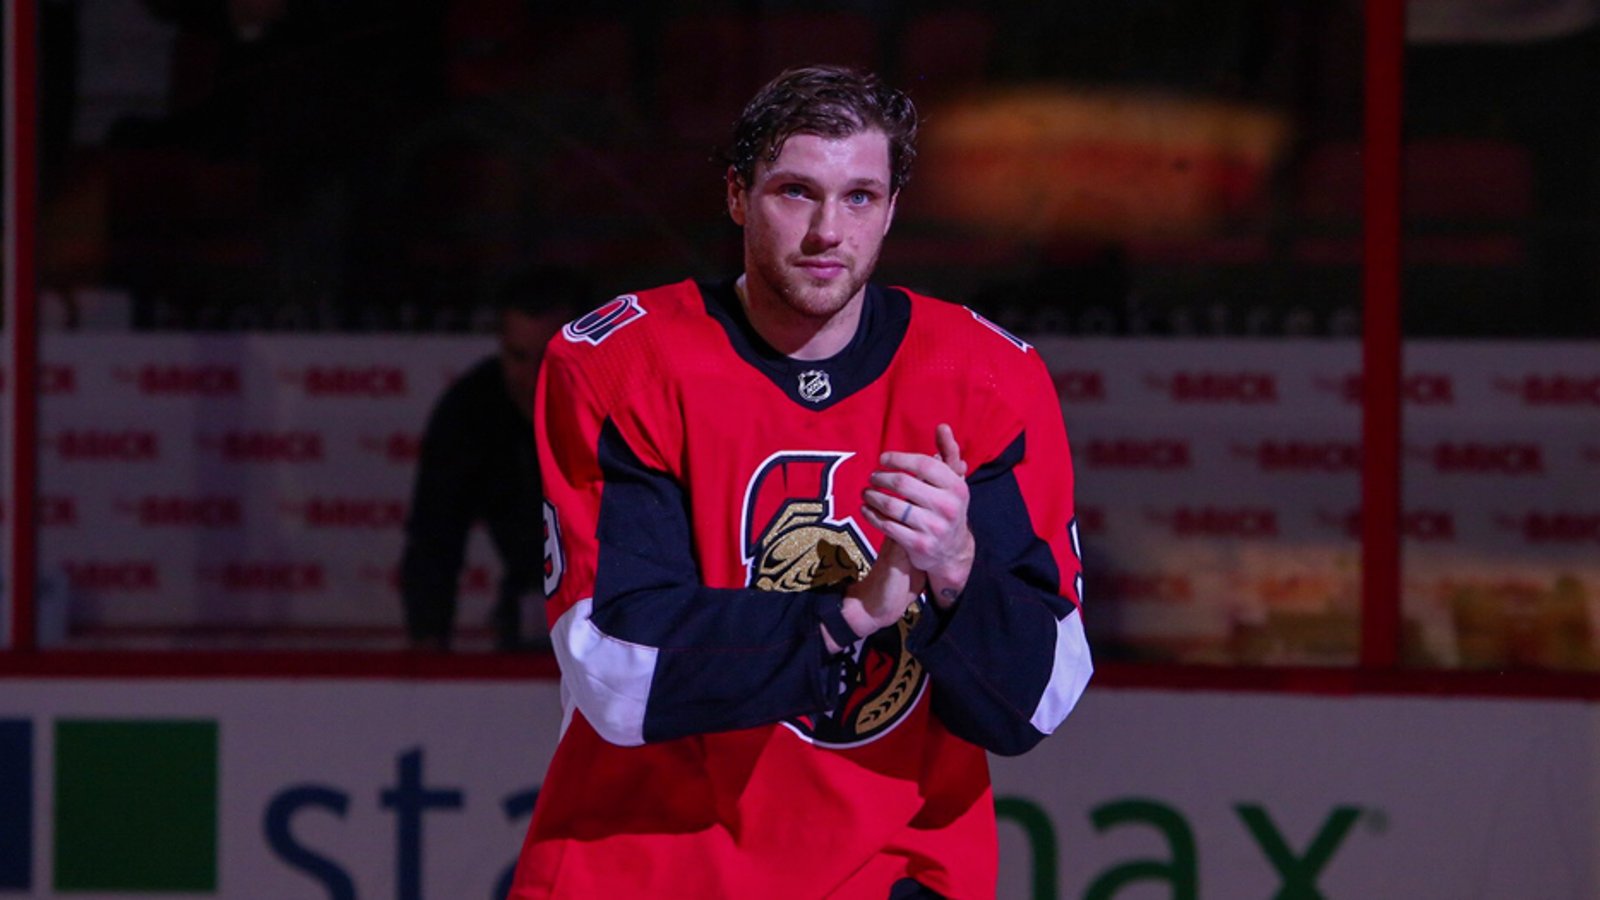 Bobby Ryan tears up as fans chant his name following return from NHLPA Substance Abuse program